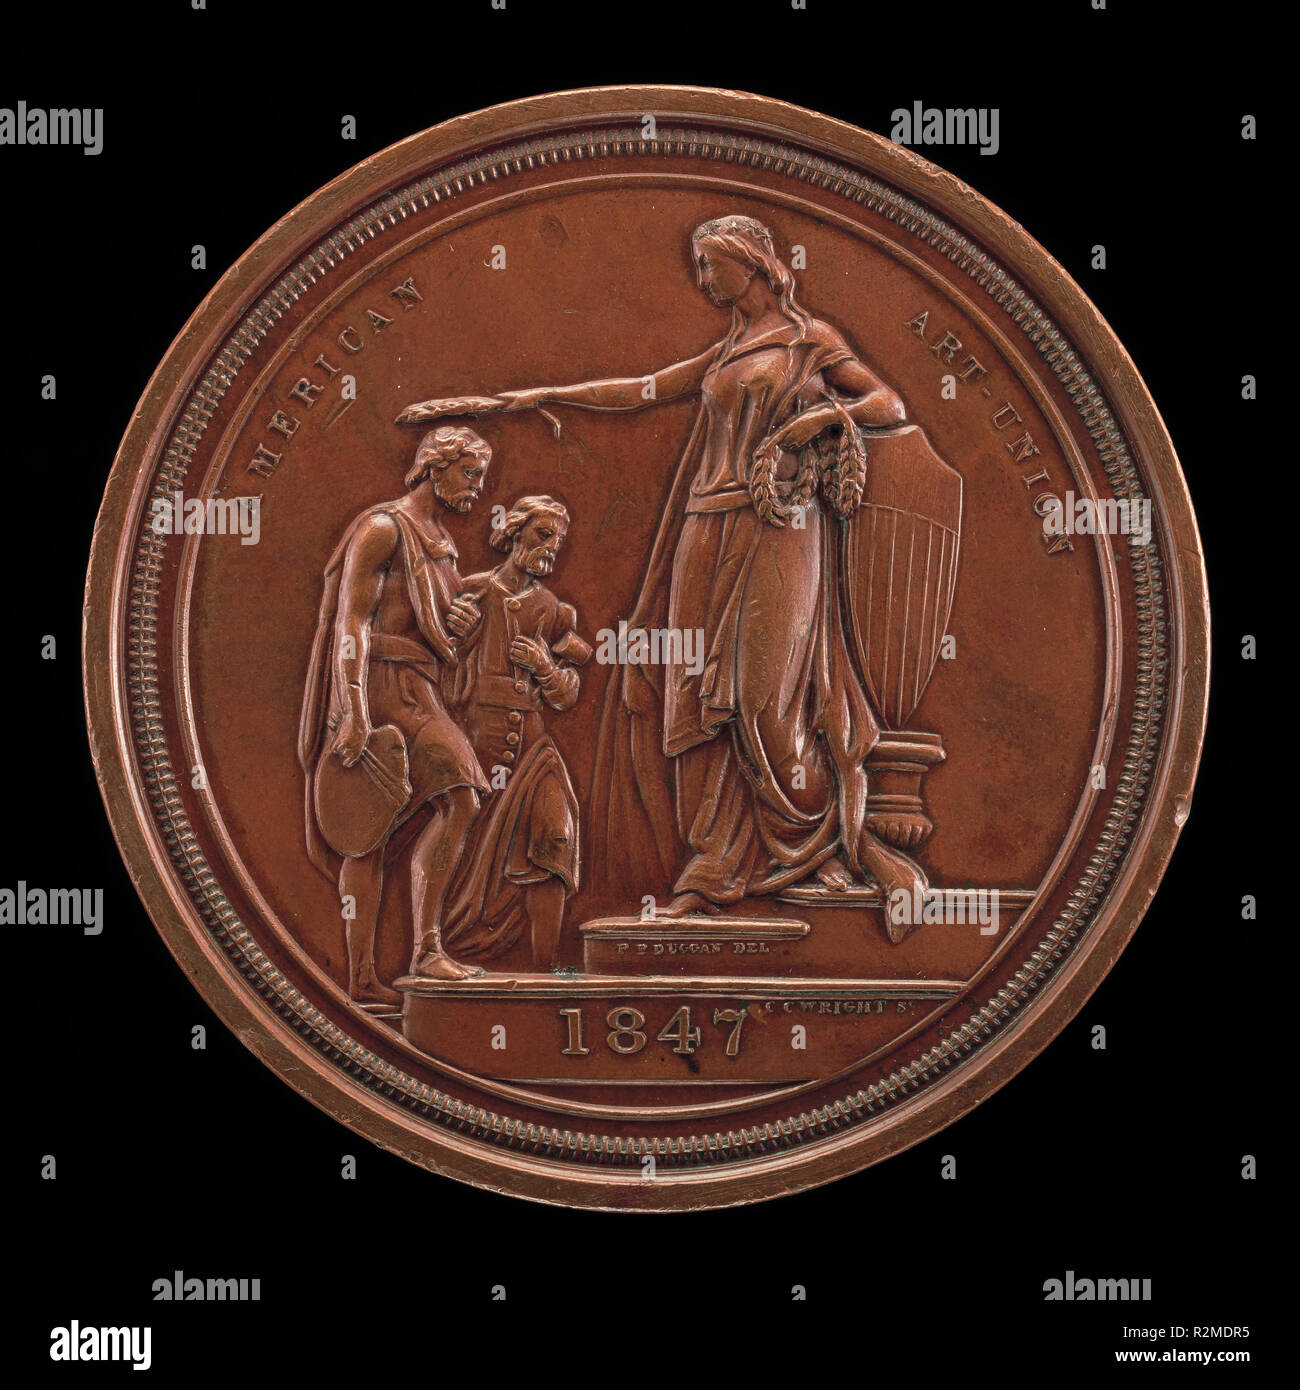 Fame Crowning Painting and Sculpture [reverse]. Dated: 1847. Dimensions: overall (diameter): 6.42 cm (2 1/2 in.)  gross weight: 145.37 gr (0.32 lb.)  axis: 12:00. Medium: bronze. Museum: National Gallery of Art, Washington DC. Author: Charles Cushing Wright, die engraver, after design by Paul Peter Duggan. Stock Photo